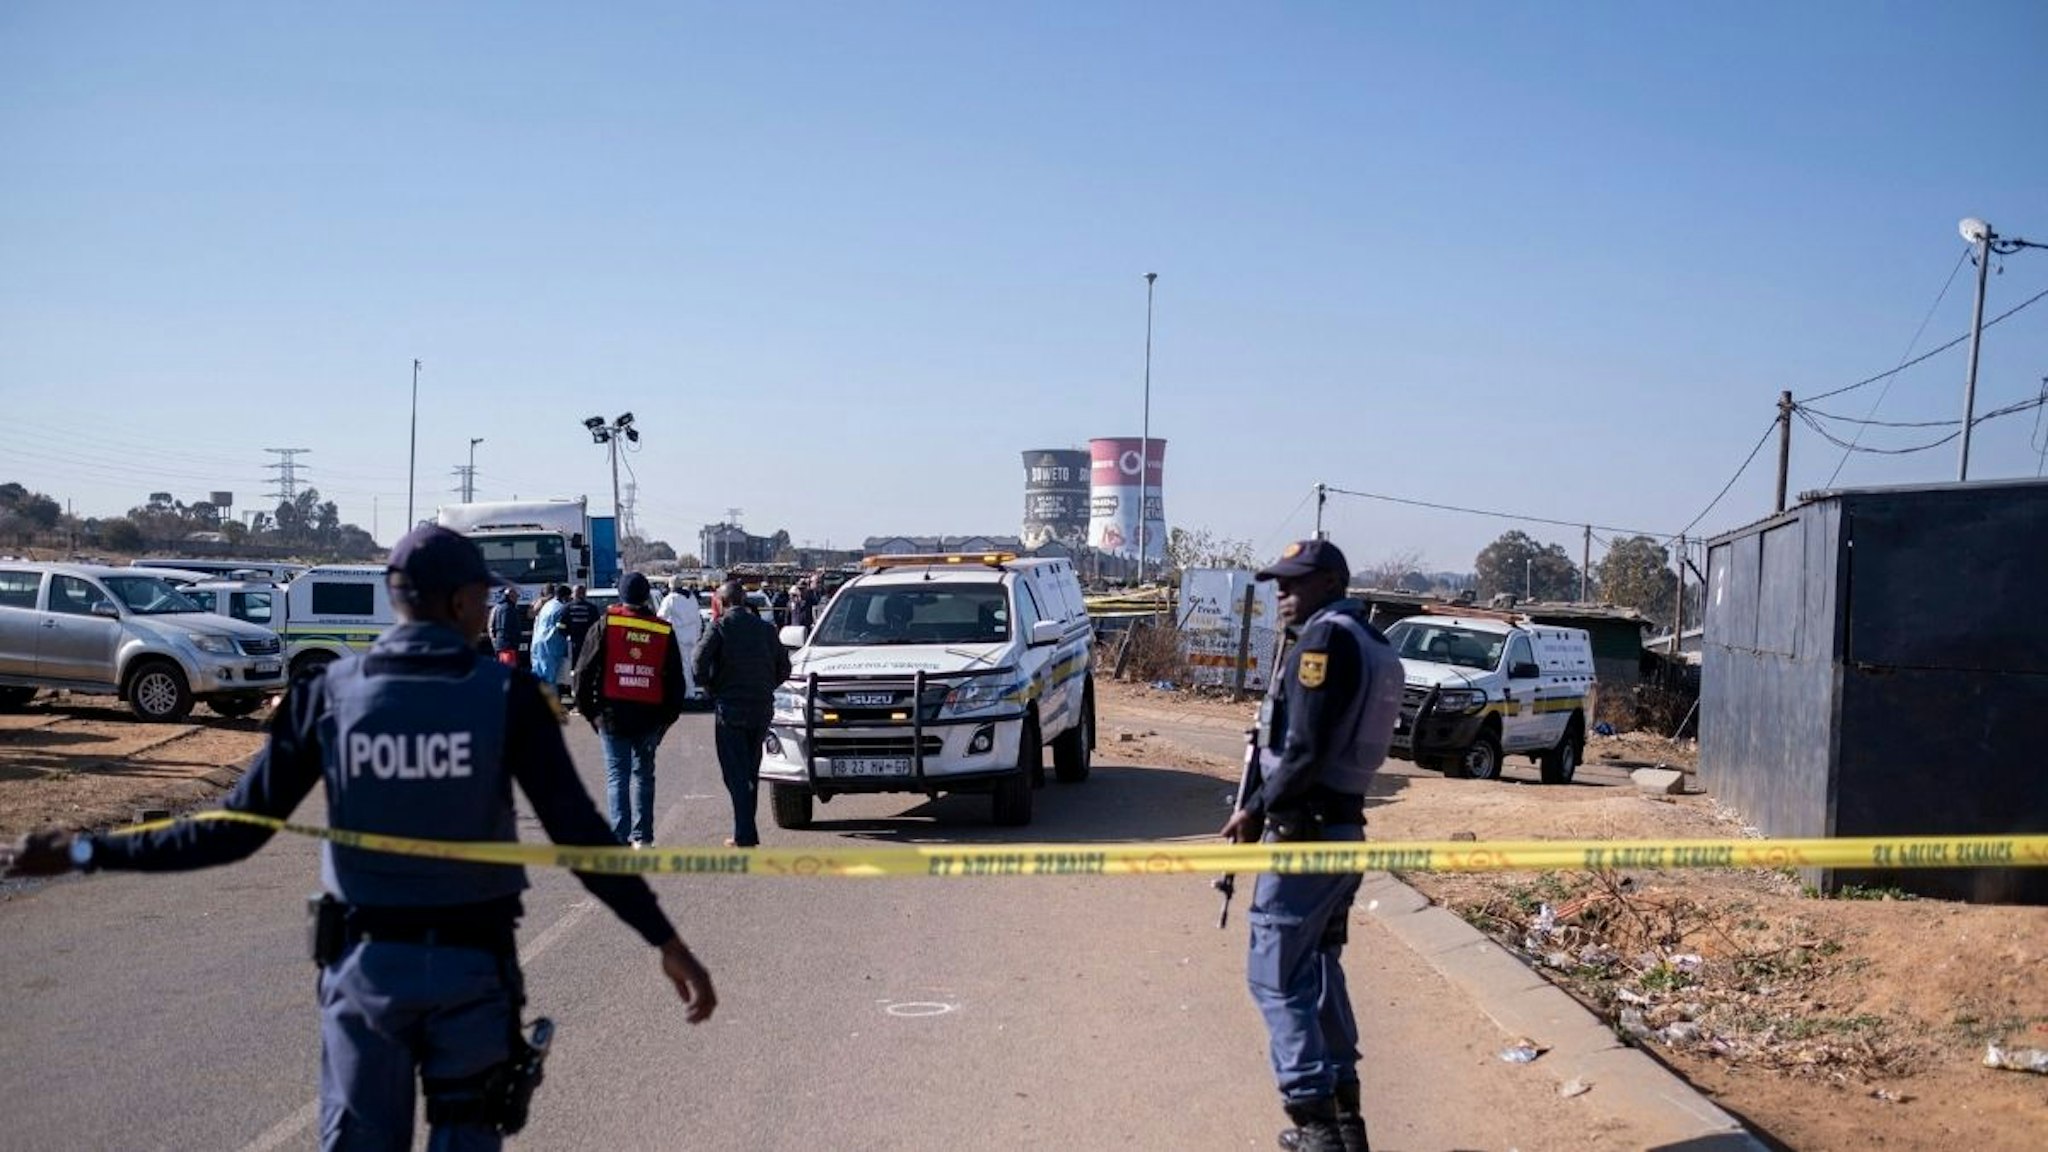 South African Police Service (SAPS) officers enforce a perimeter around a crime scene as pathalogical investigators inspect the crime scene where 14 people where shot dead in a tavern as a forensic team investigates in Soweto on July 10, 2022.